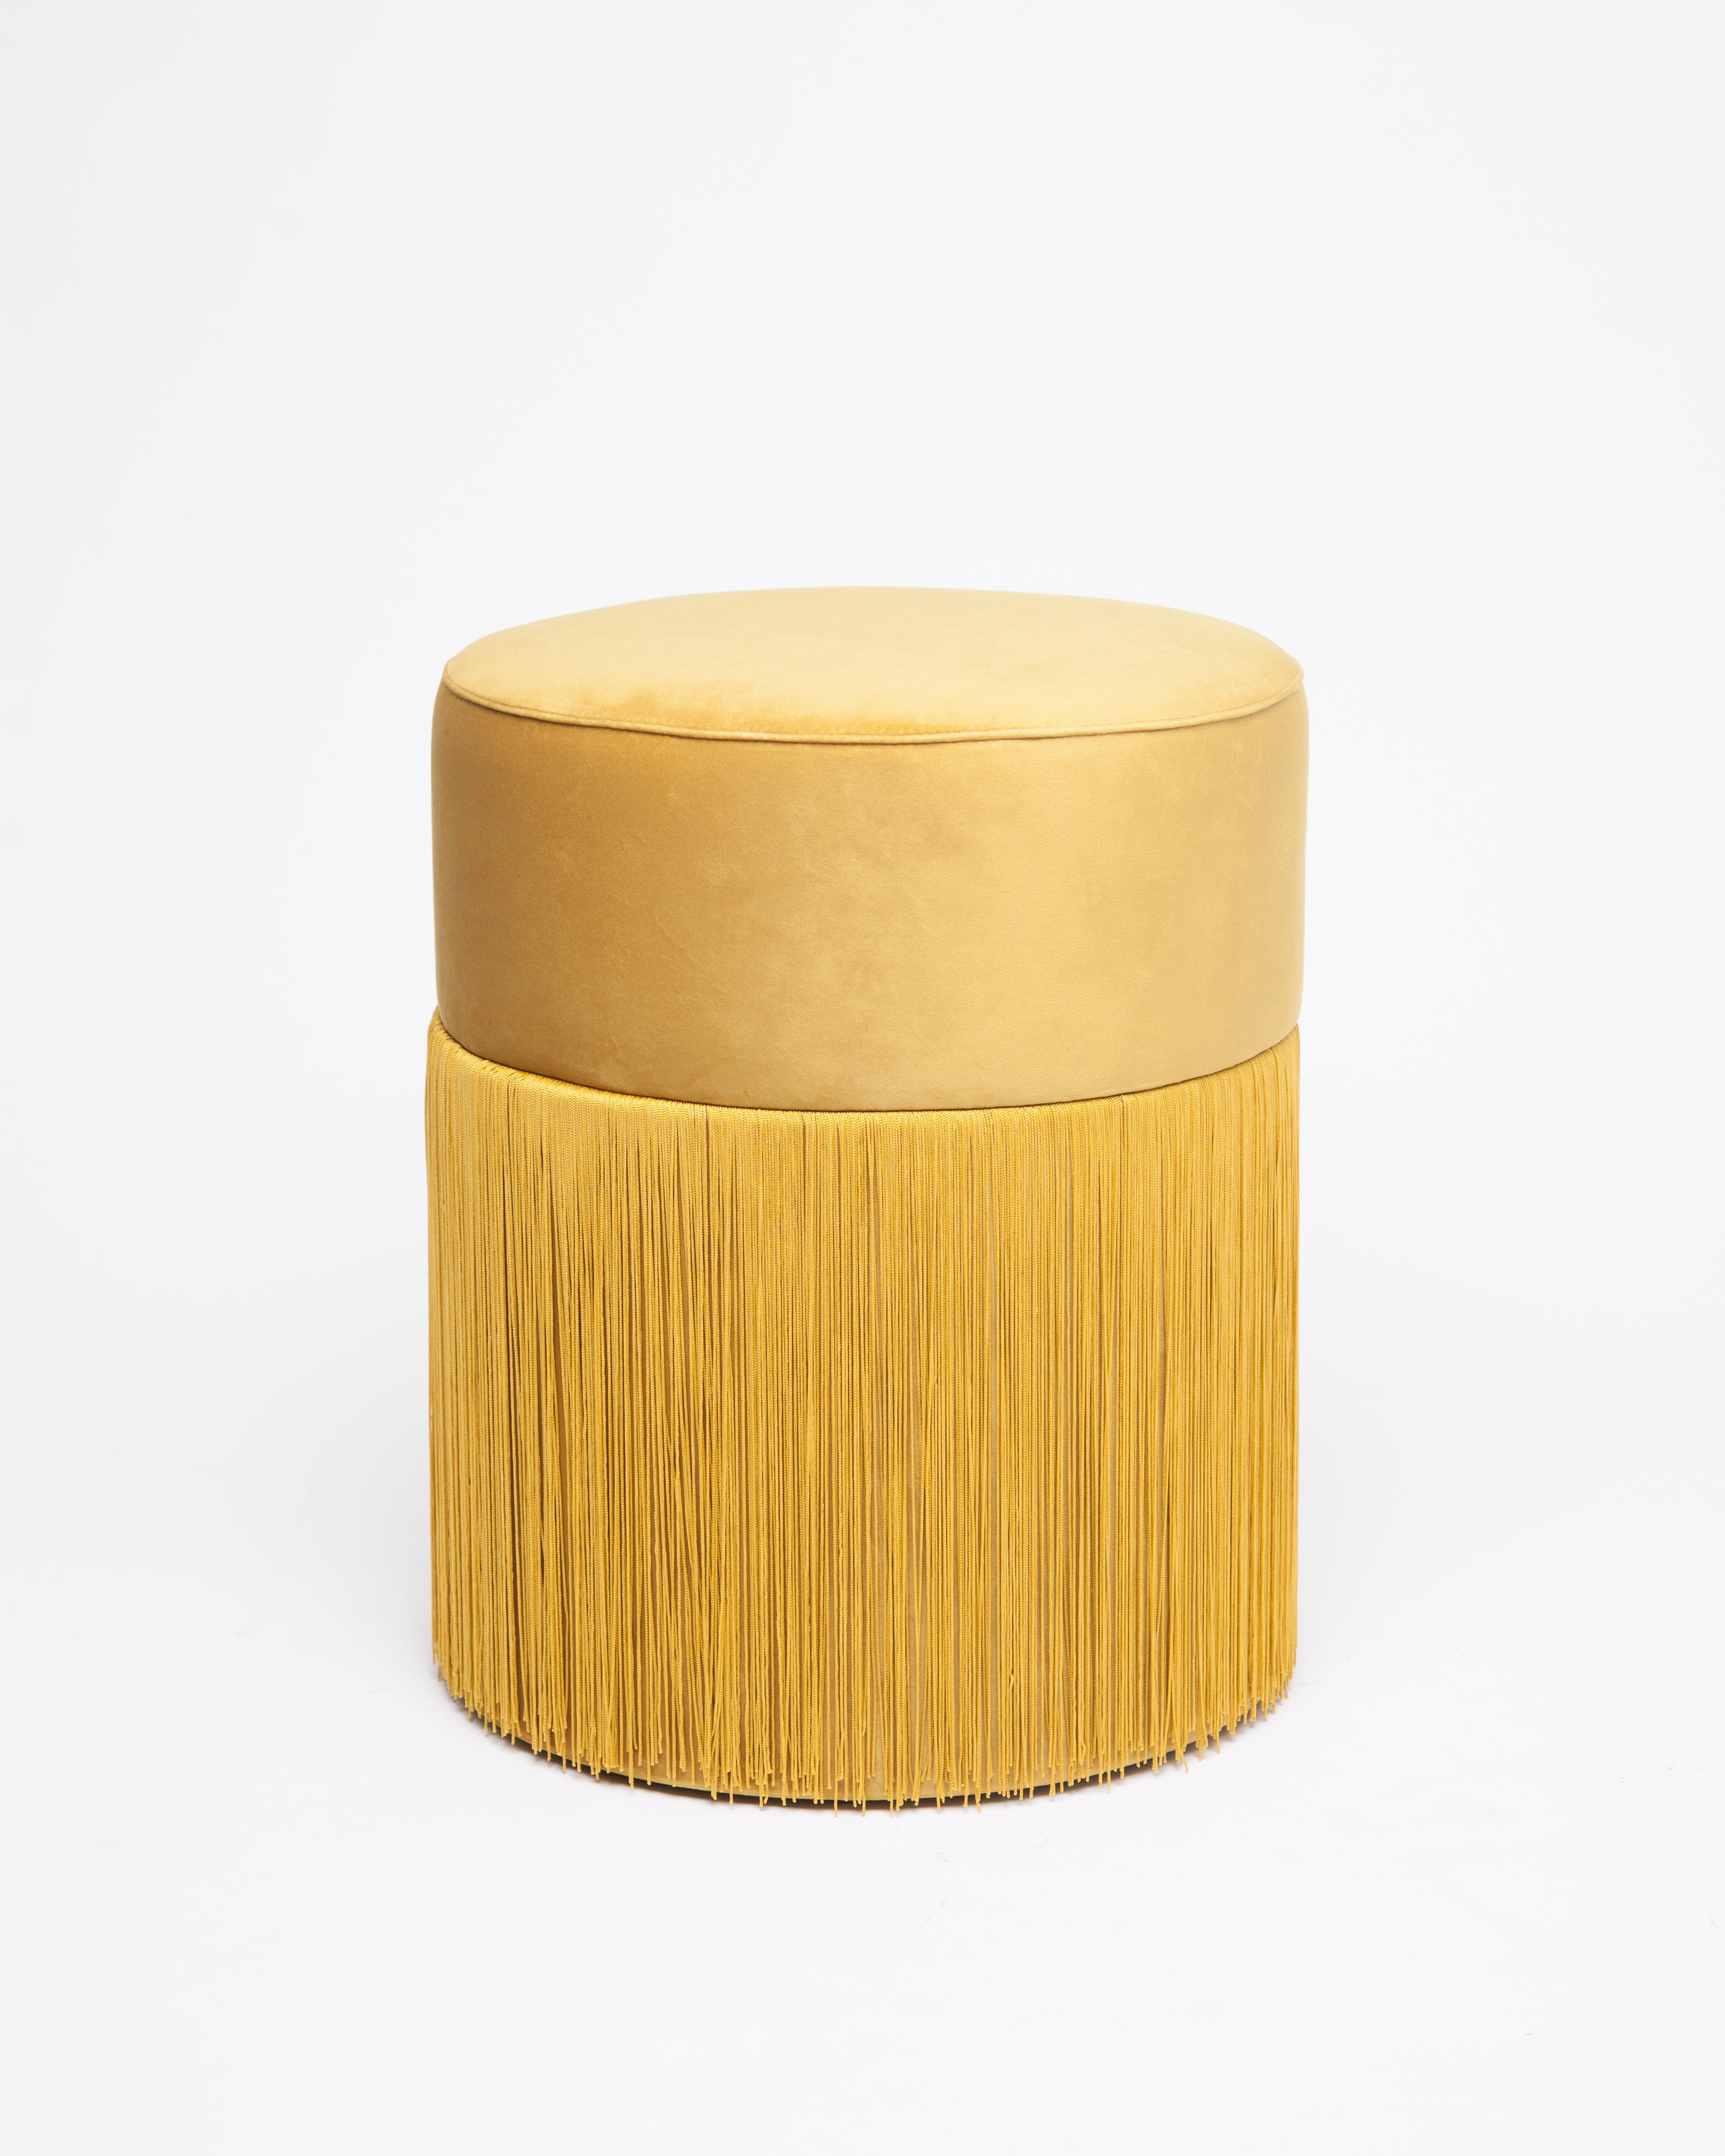 Pouf pill S by Houtique
Dimensions: H 45 x D 35 cm
Materials: Velvet upholstery and 30cm fringes

Pill Pouf S
Art Deco style pouf with wood structure and velvet fabric.
2 fiber-board discs of 16mm, joined by wooden tufts.
Upholstery Velvet